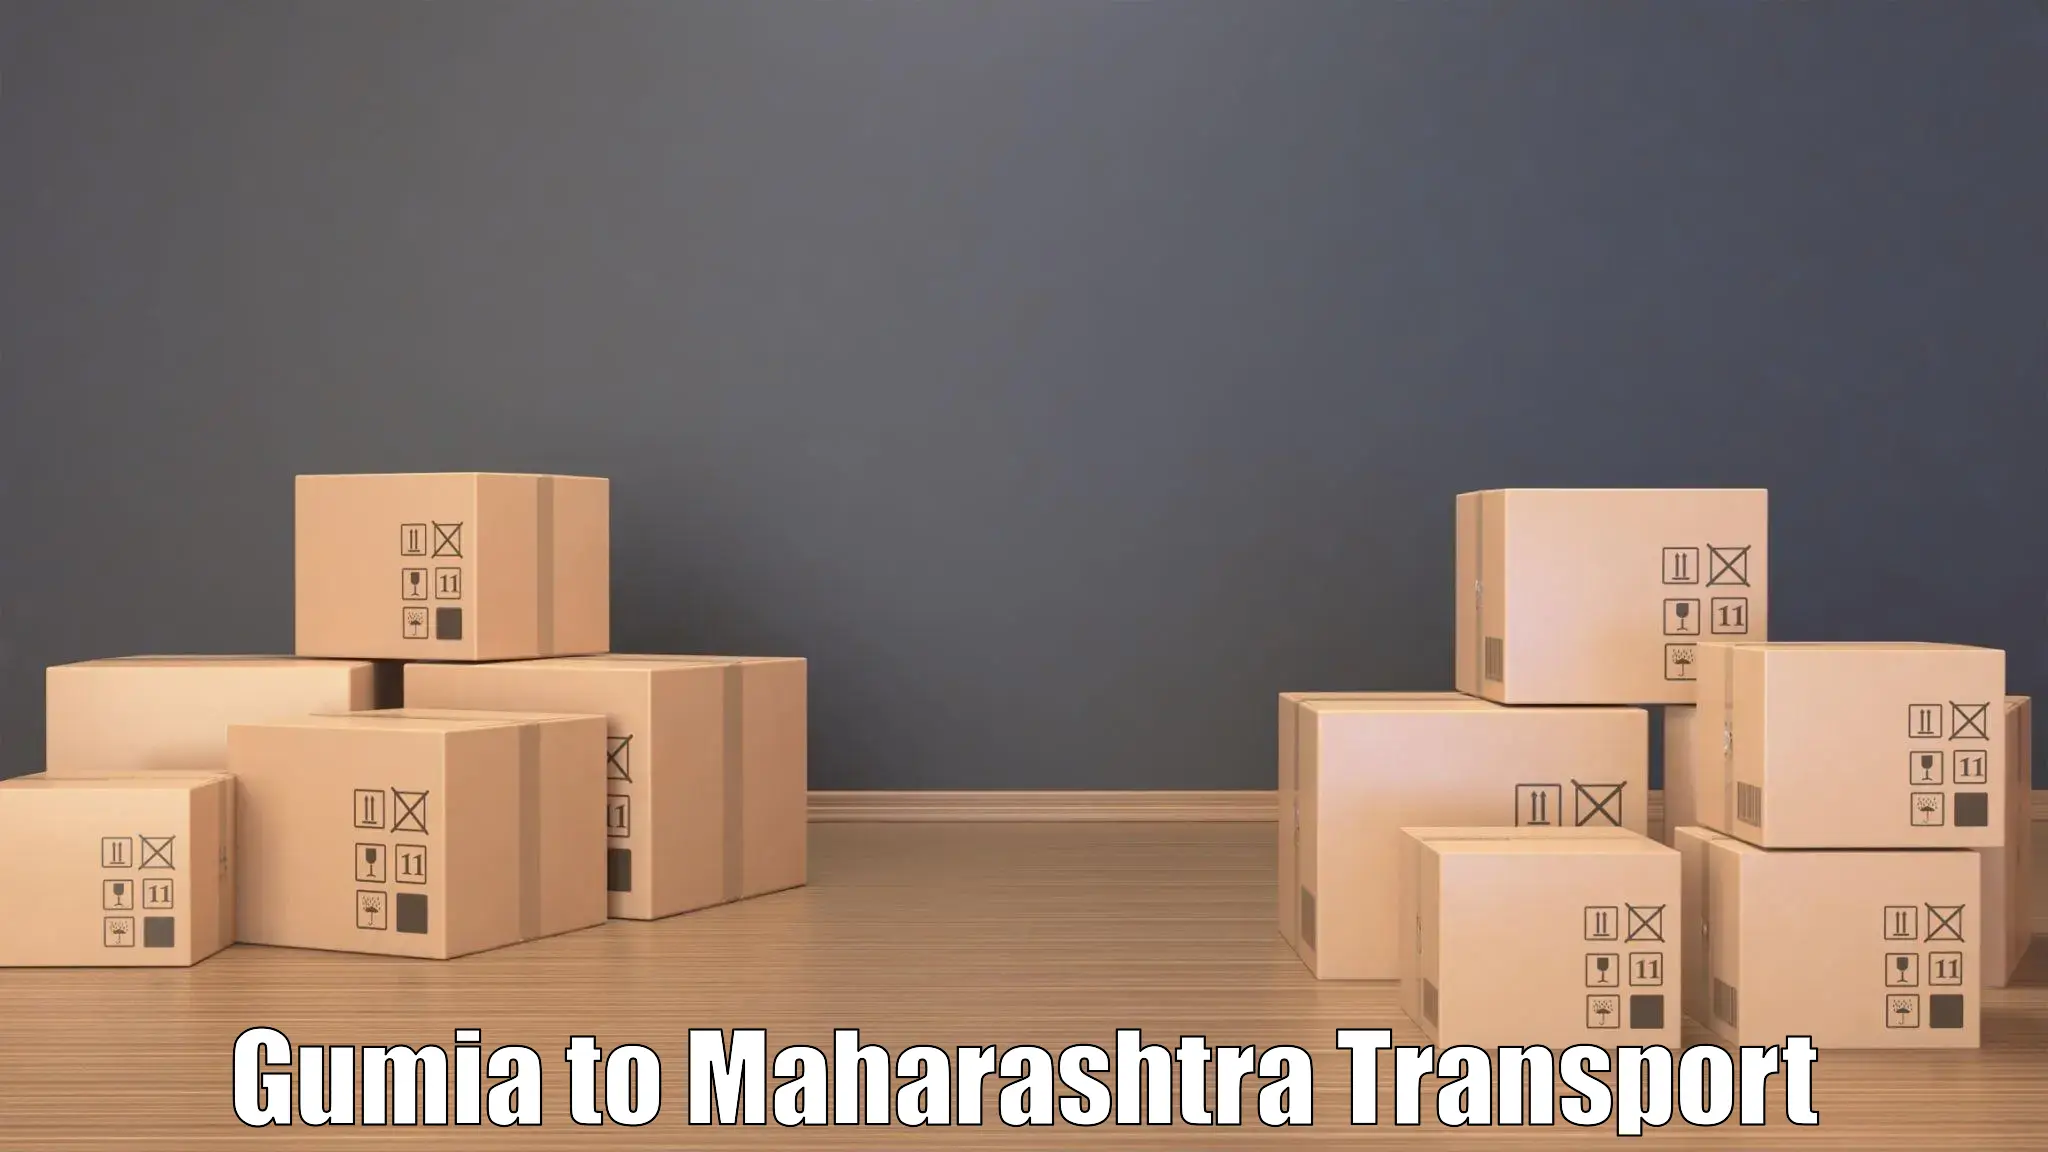 Package delivery services Gumia to Raigarh Maharashtra